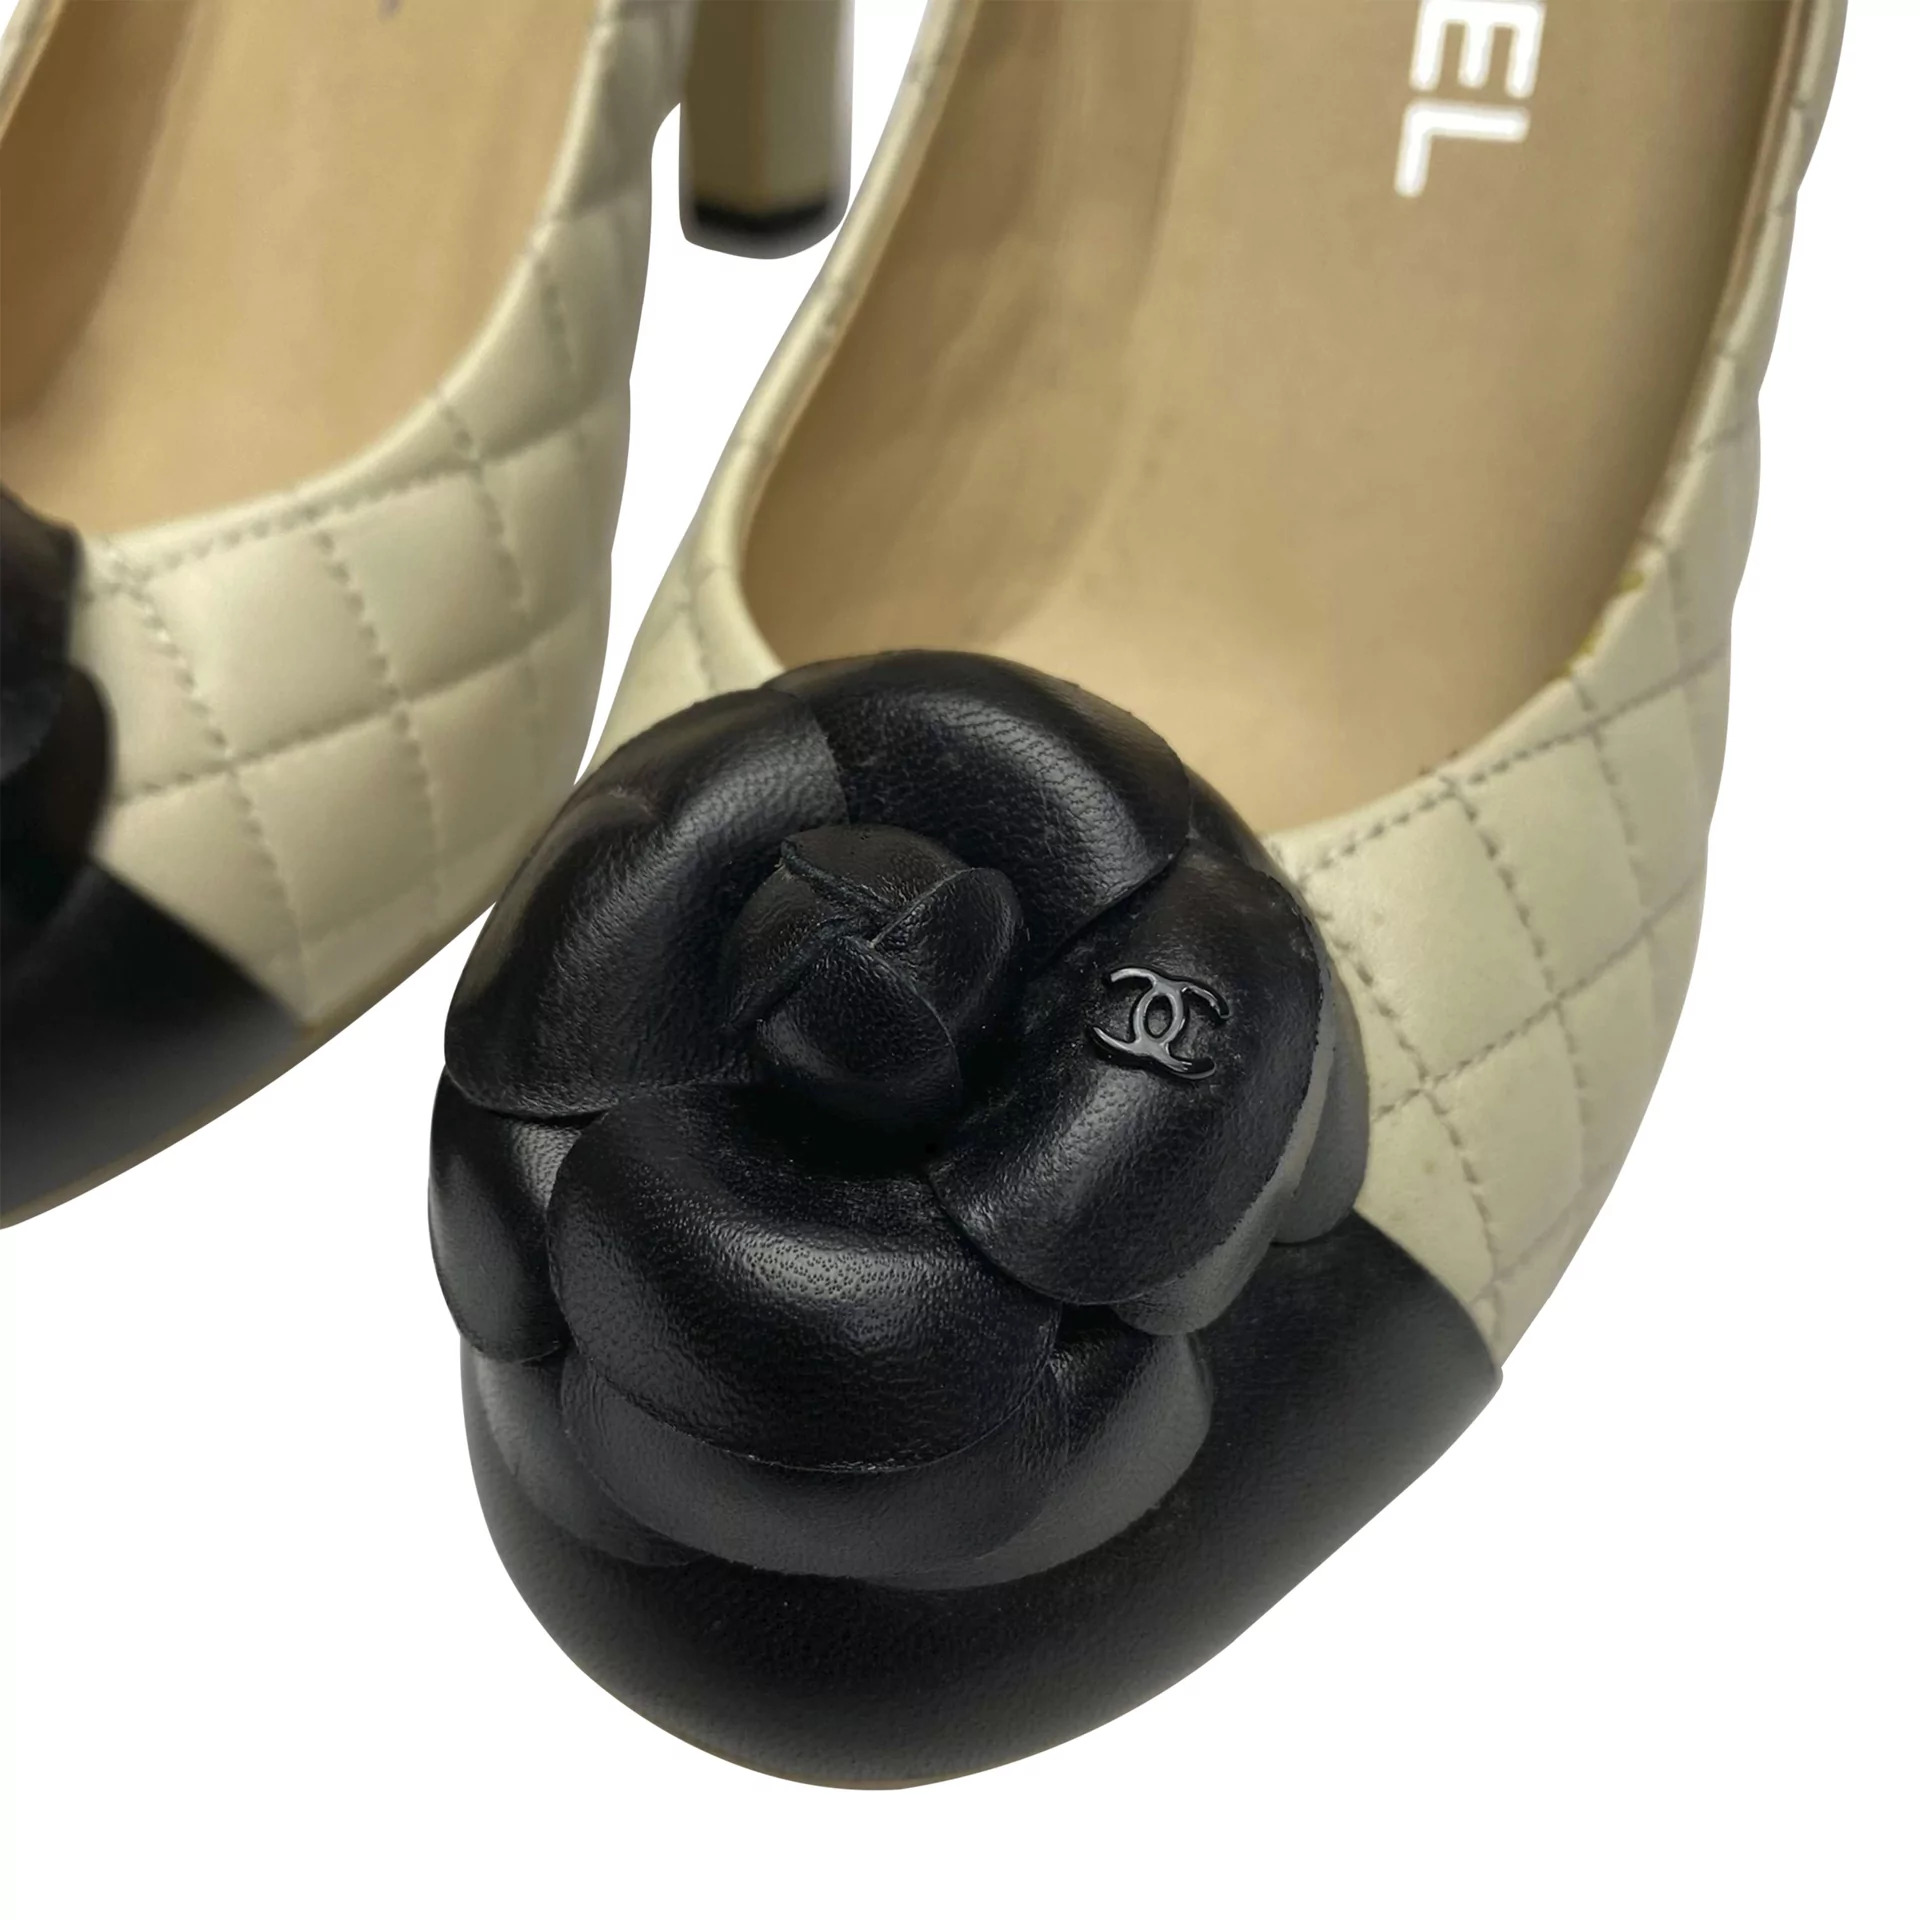 Sapato Chanel Camellia CC Quilted Pumps